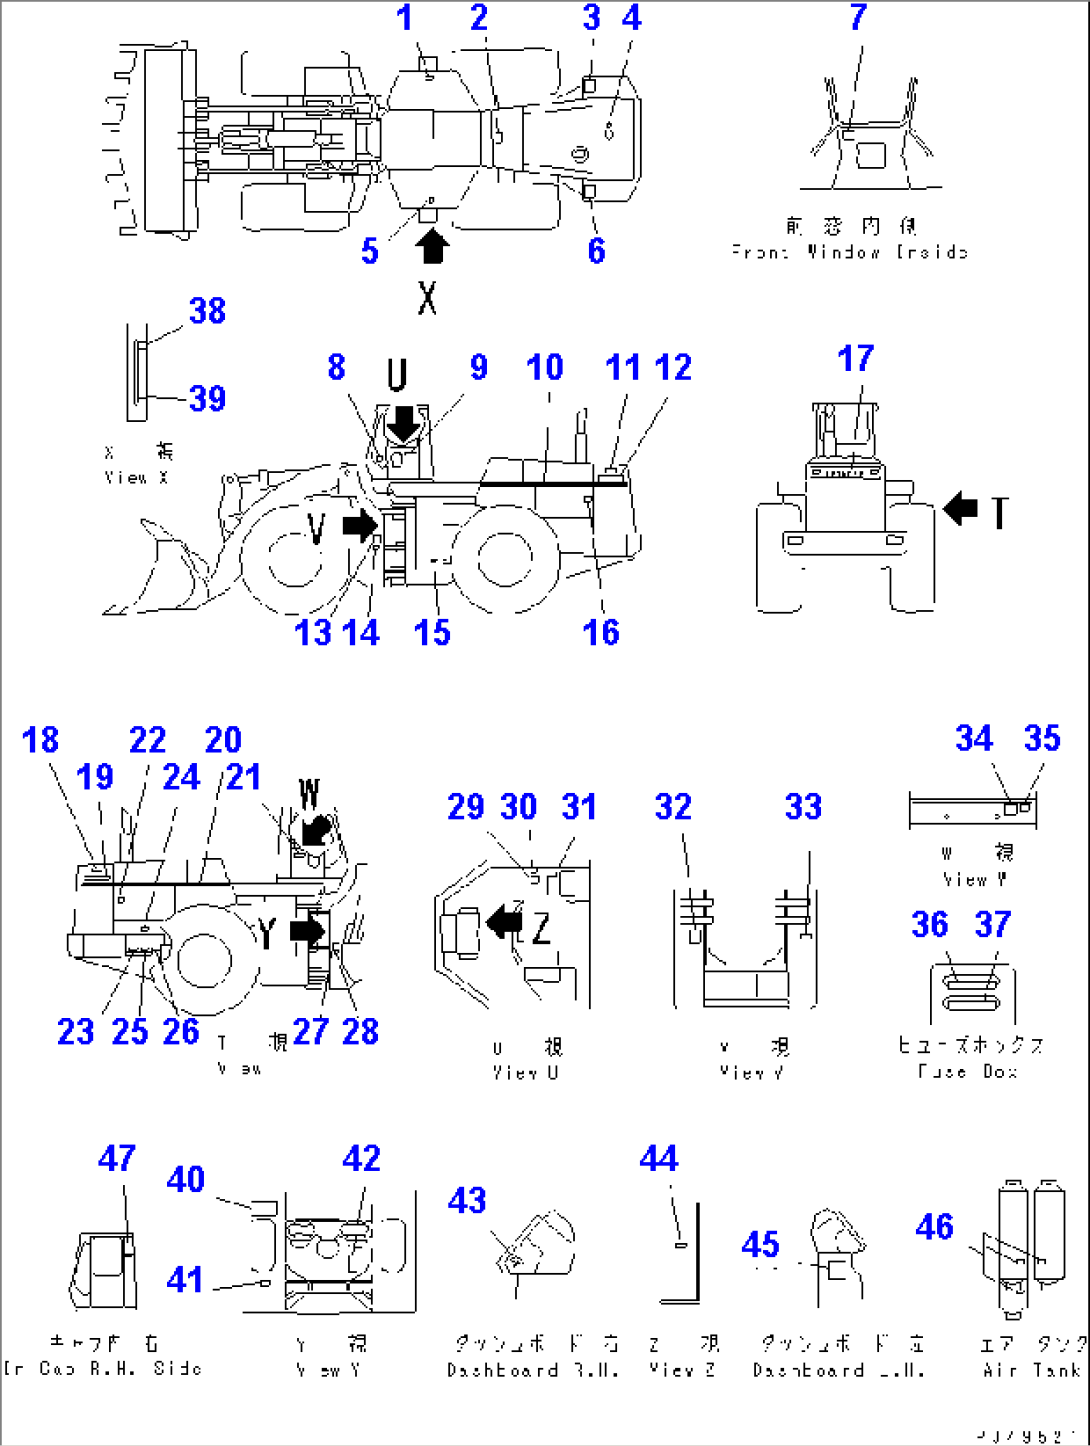 MARKS AND PLATES (JAPANESE)(#10092-)